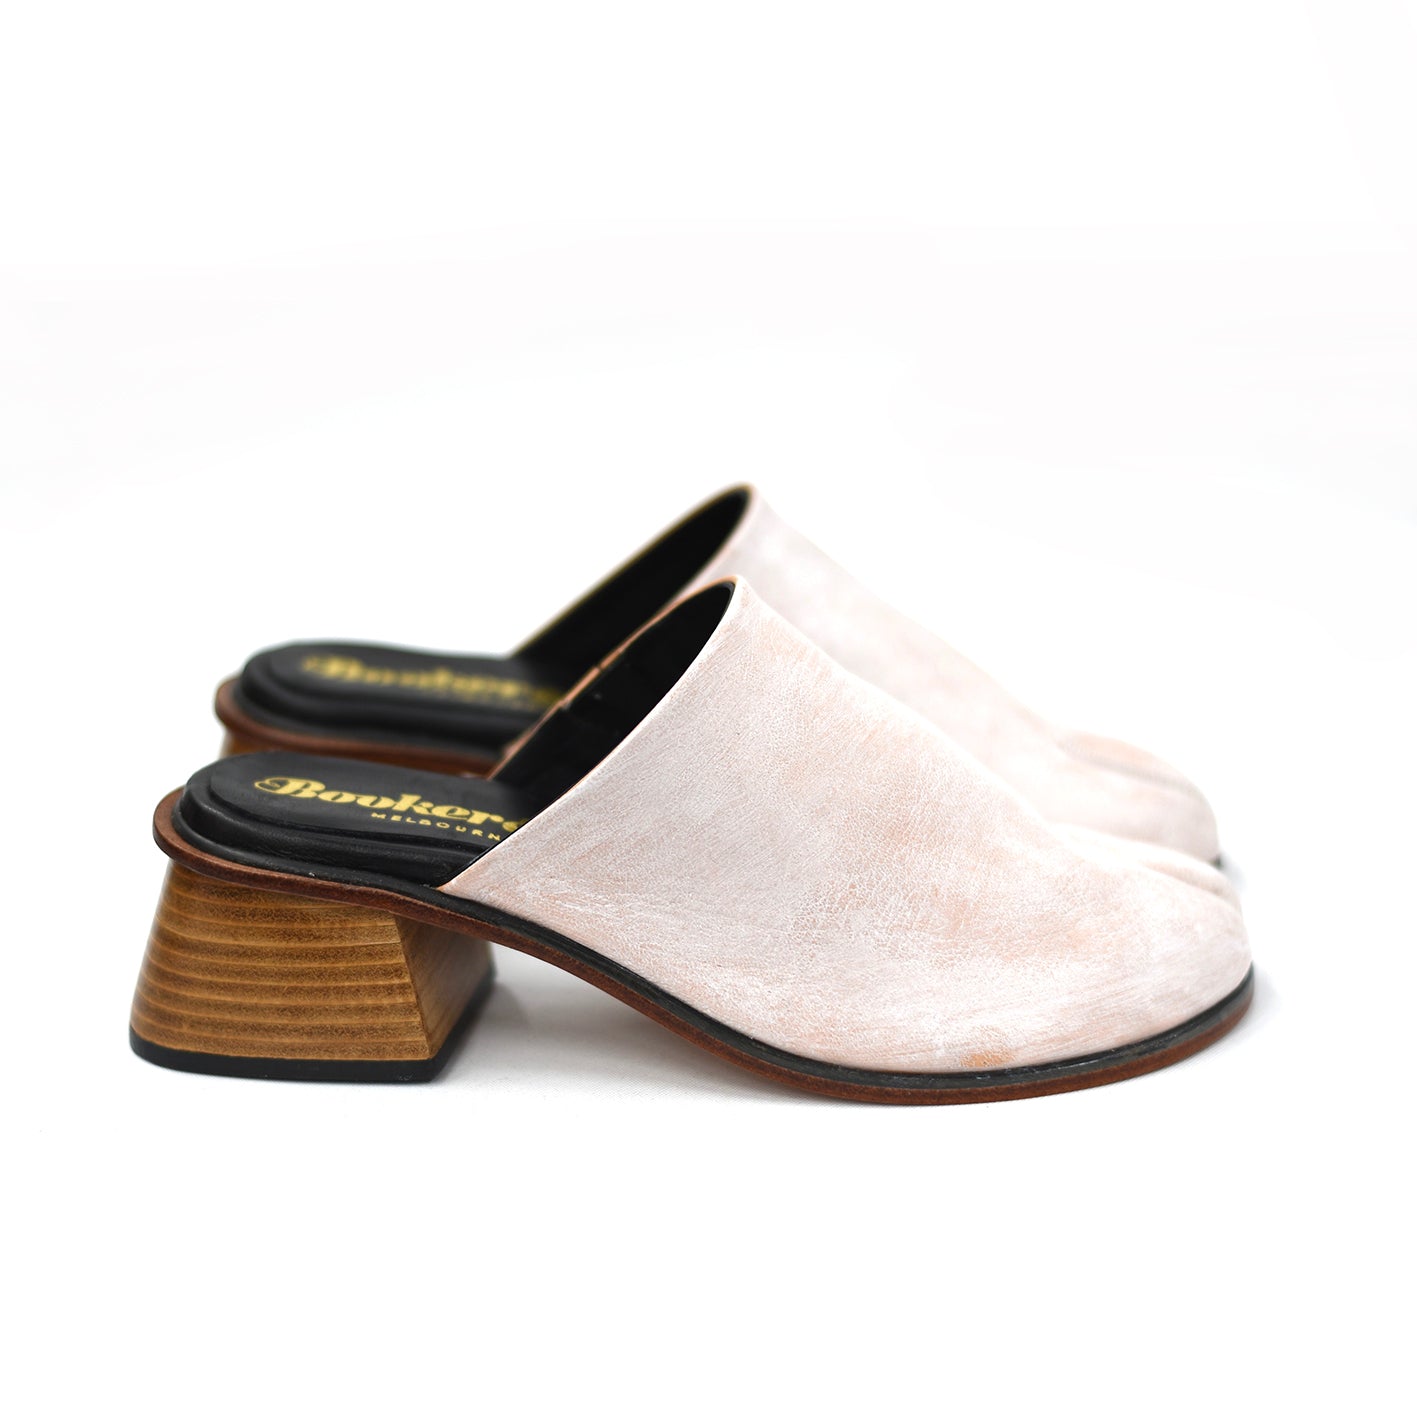 Get rid of foot strangulation with C width on these mules